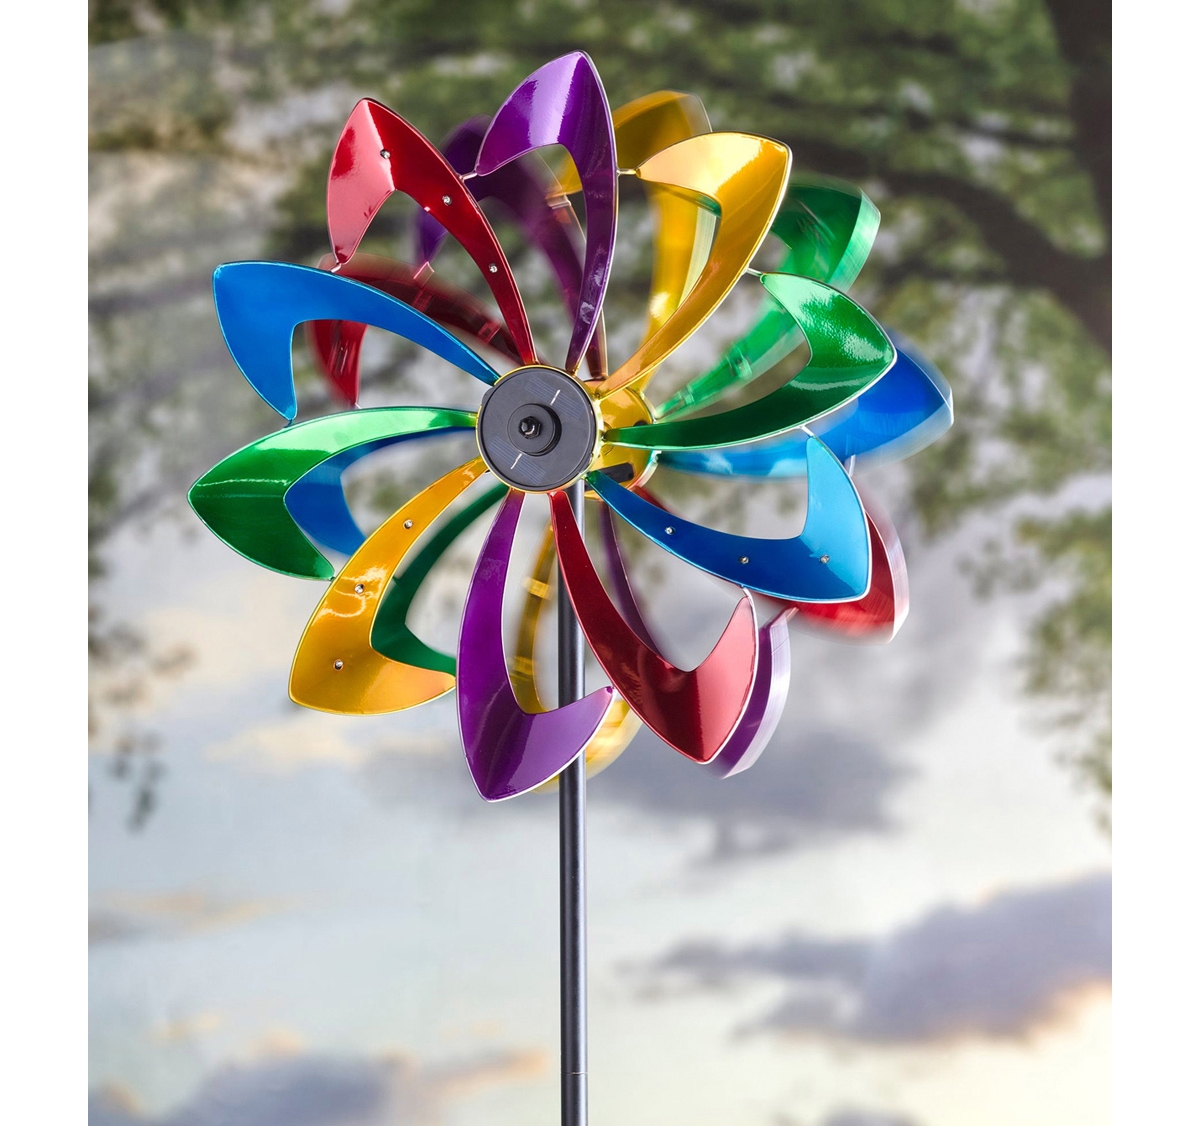 Evergreen 75"h Solar Wind Spinner, Sunflower Fields W/running Color Lights In Multicolored